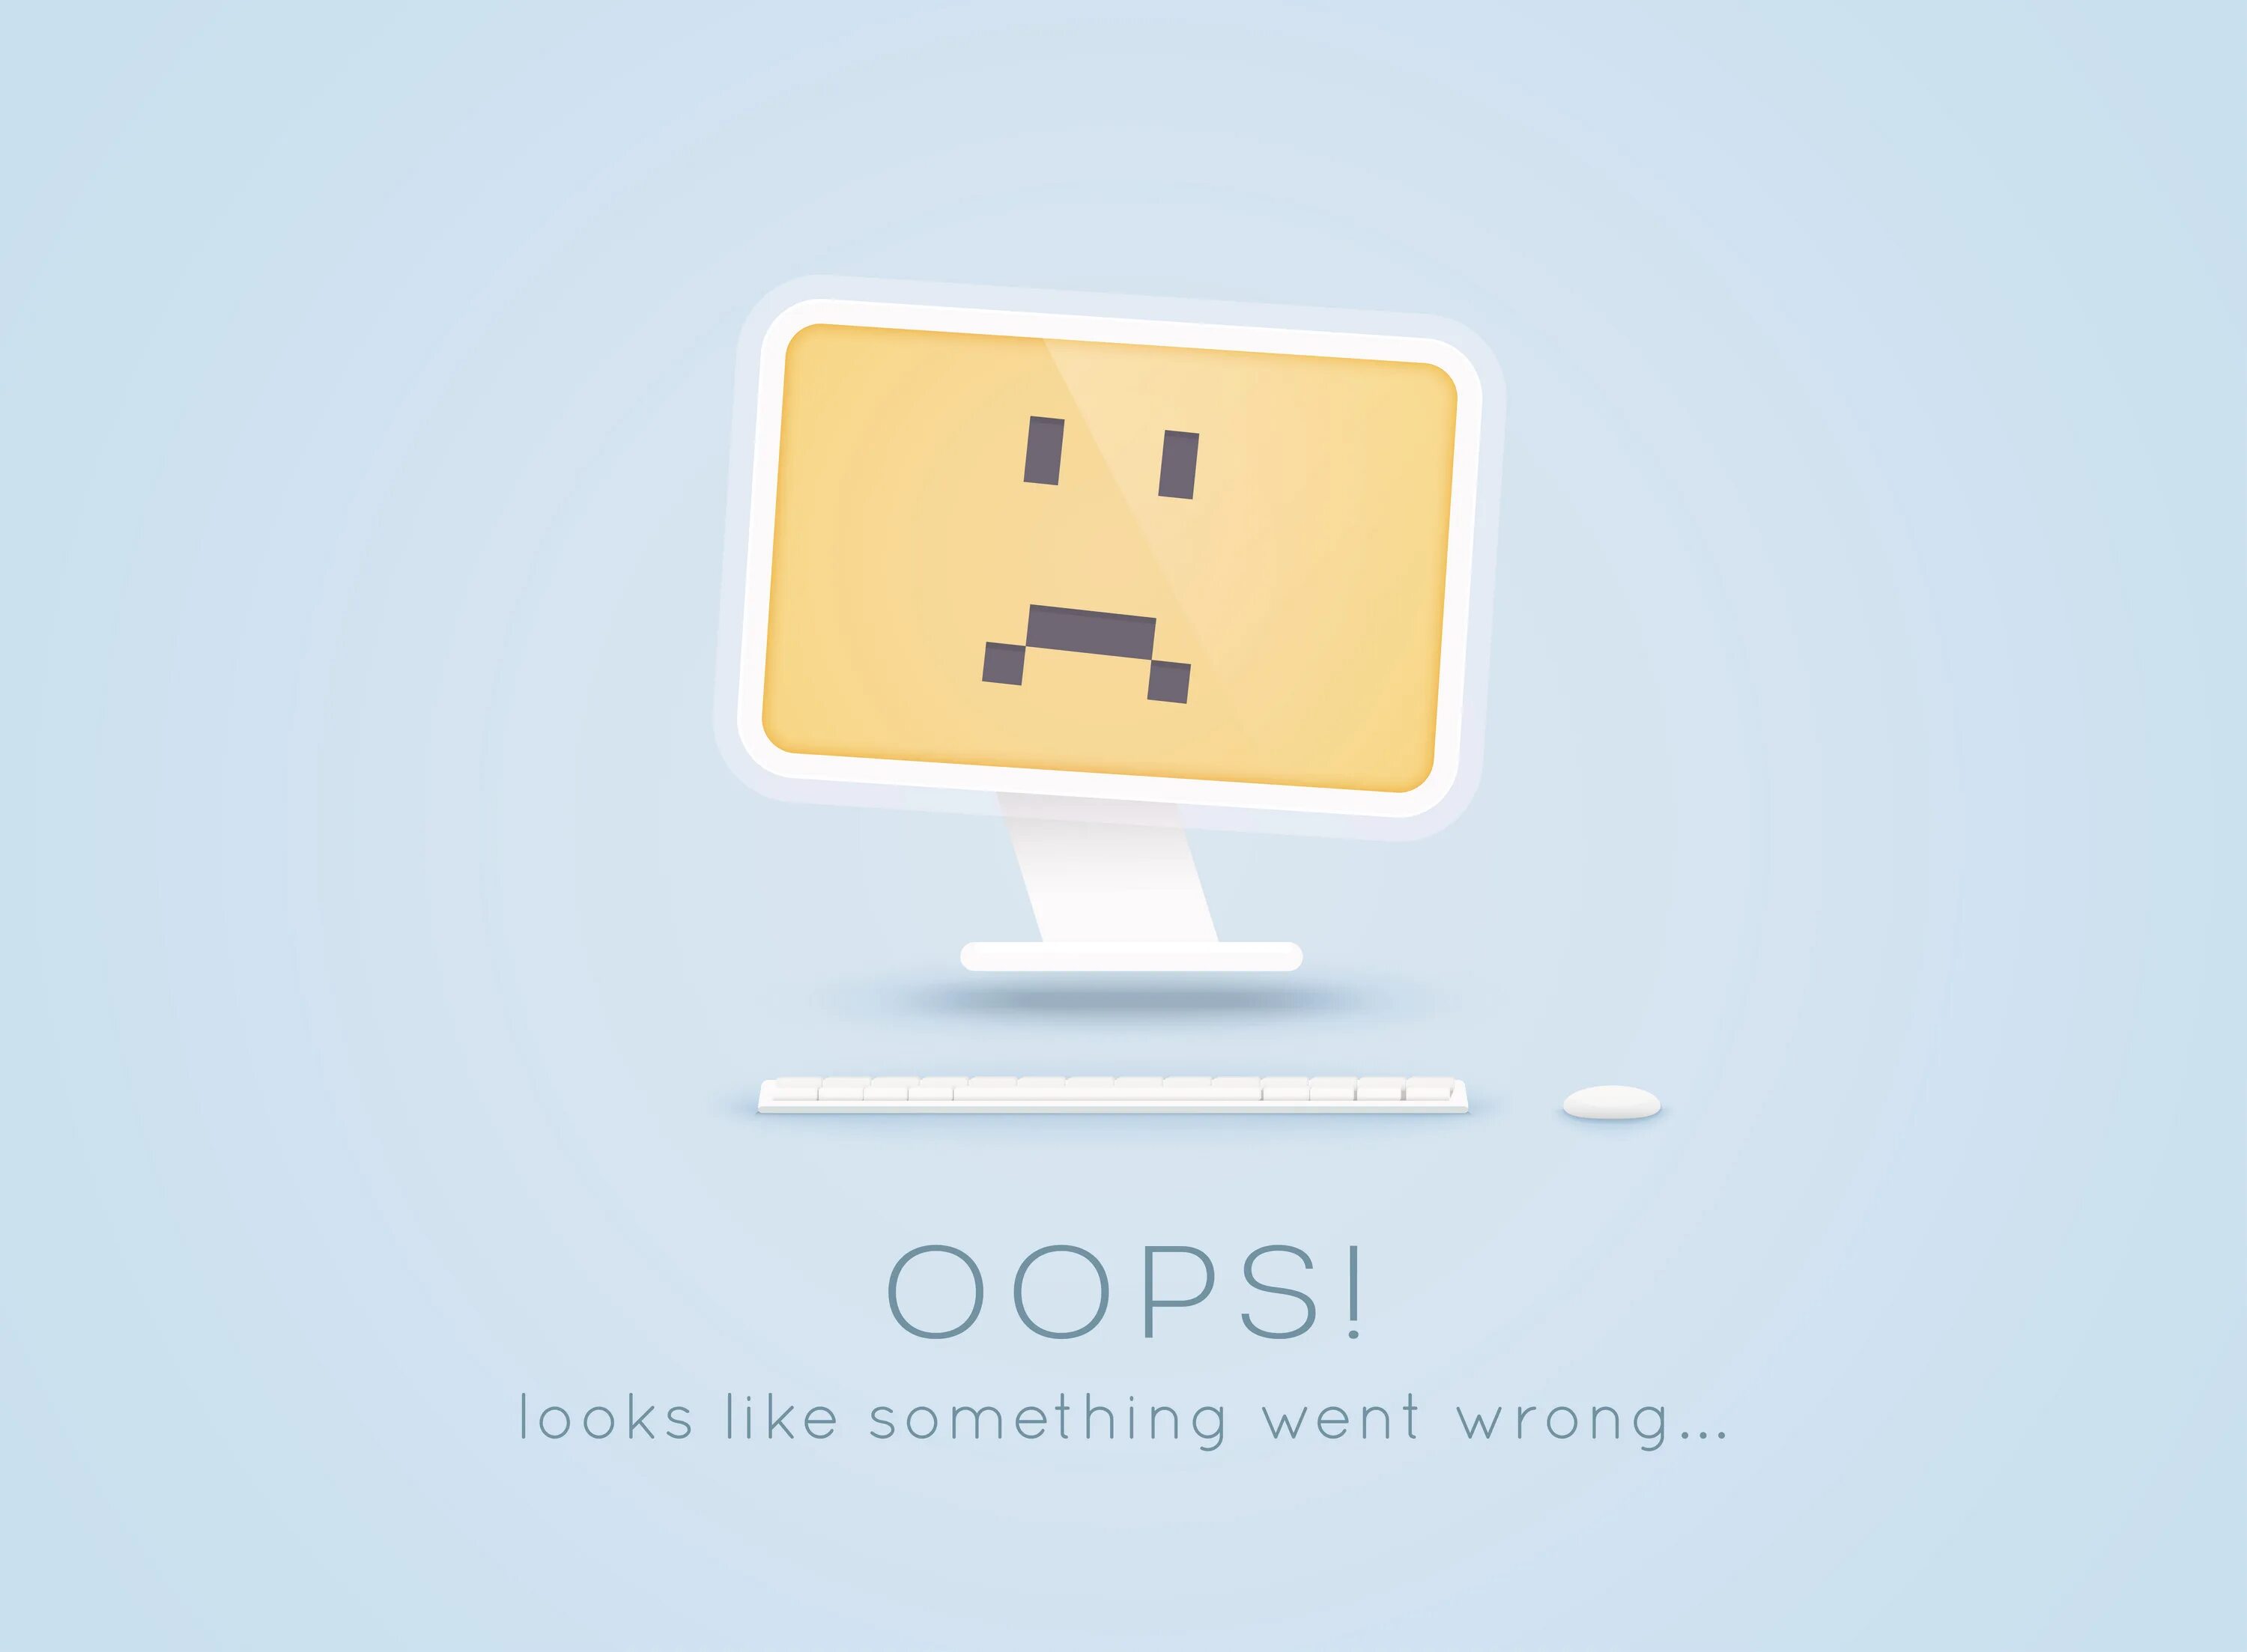 Like something went wrong. Япикс ошибка 404. Something went wrong Screen app illustration. Page not found Hi Tech. Not found Page Business.